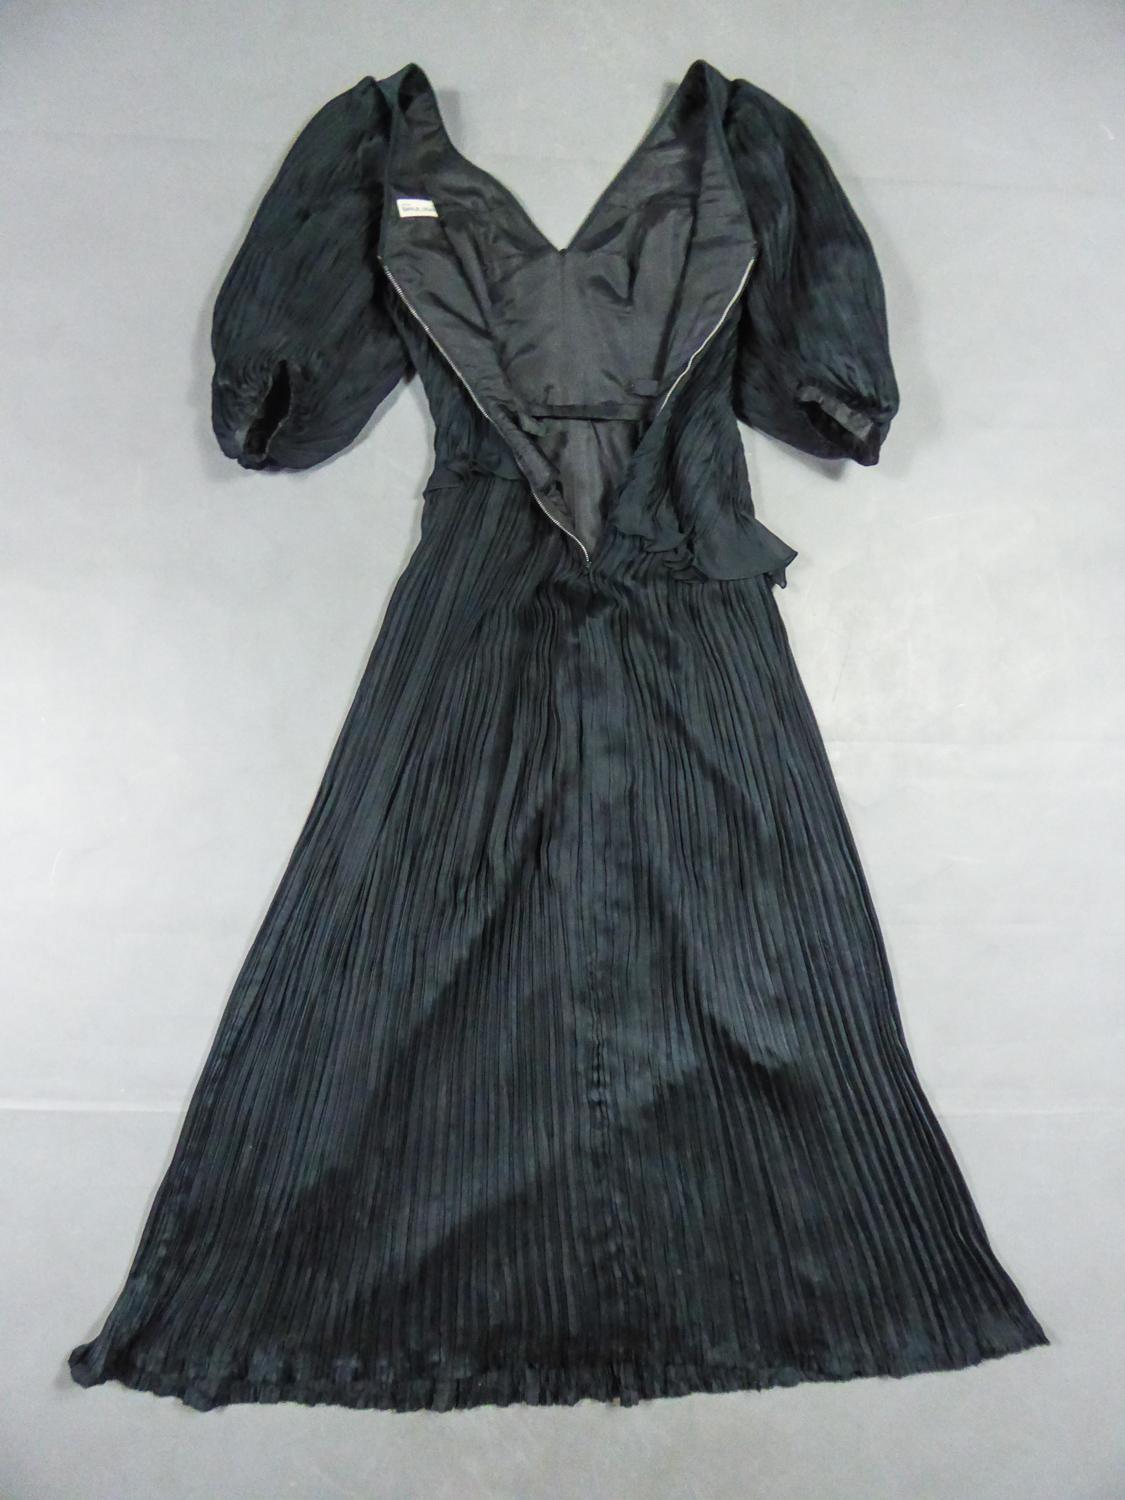 Circa 1985-1990
Paris Haute Couture

Beautiful long evening dress in black silk crepe by Emanuel Ungaro Haute Couture numbered 295-5-85 around 1985/1990. Superb contrast of the work of pleats between the asymmetry of the bodice hugging the hips and